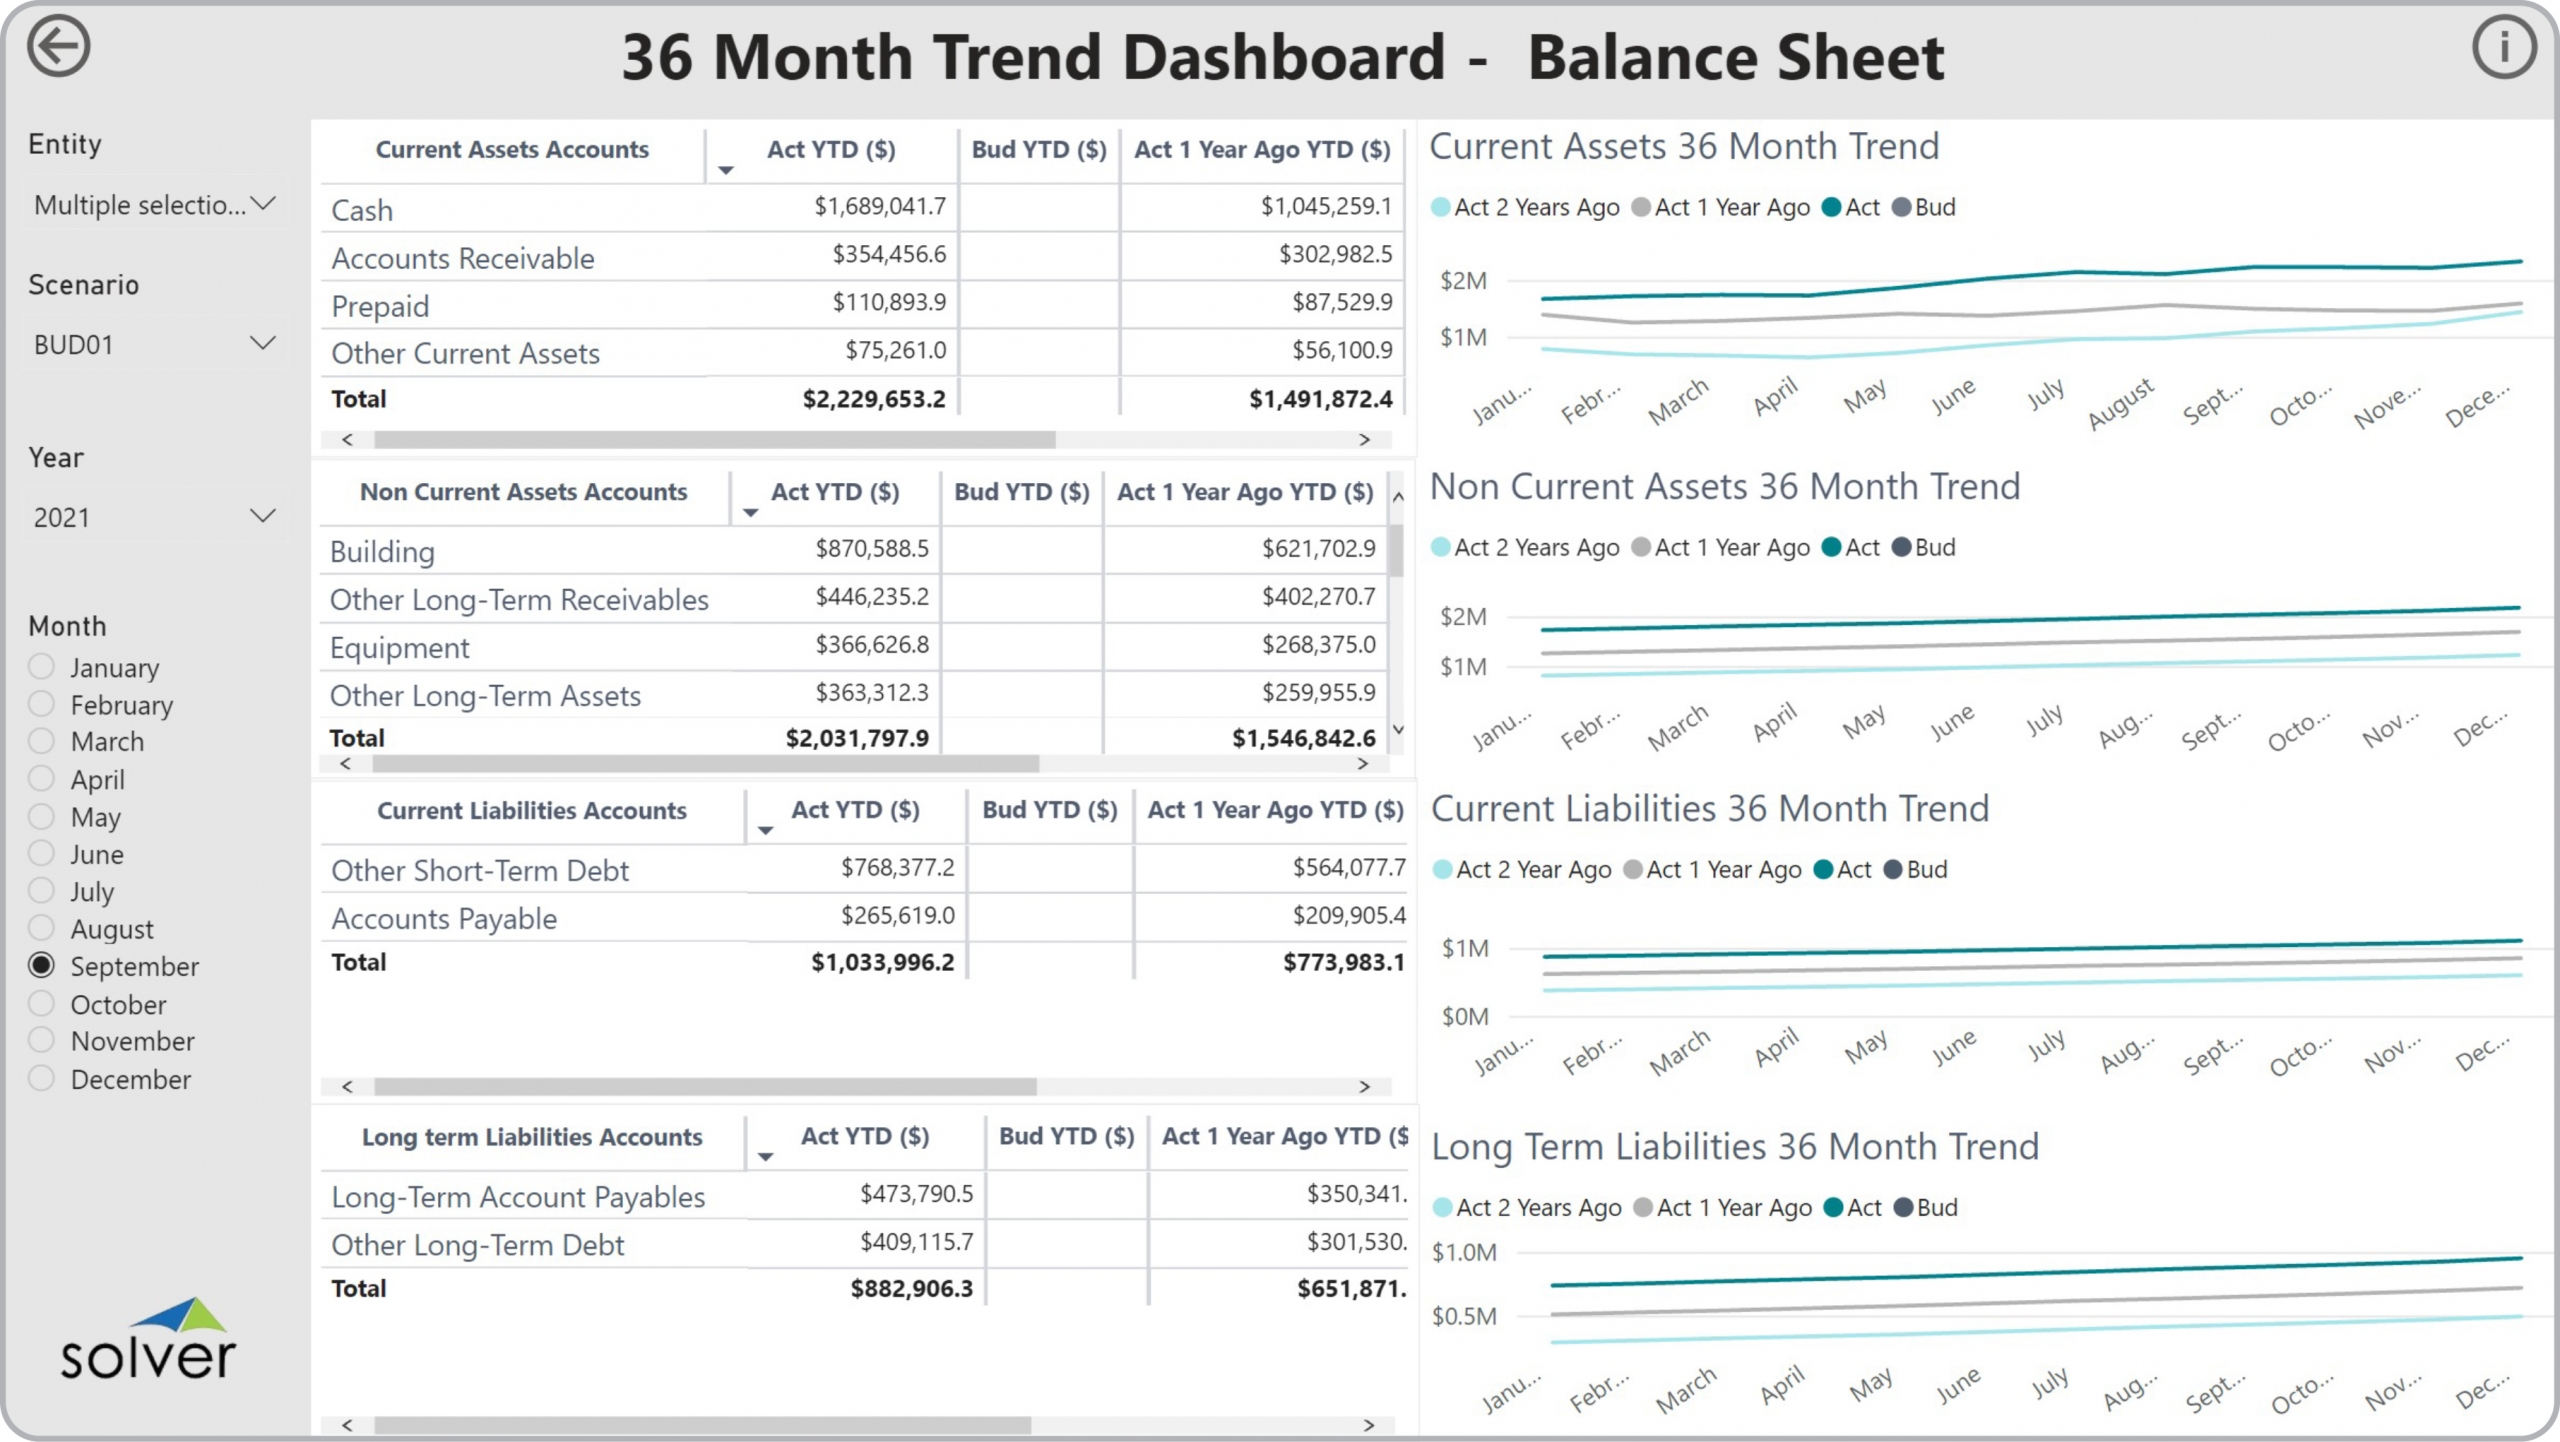 Example of a 36 Month Balance Sheet Trend Dashboard to Streamline the Monthly Reporting Process